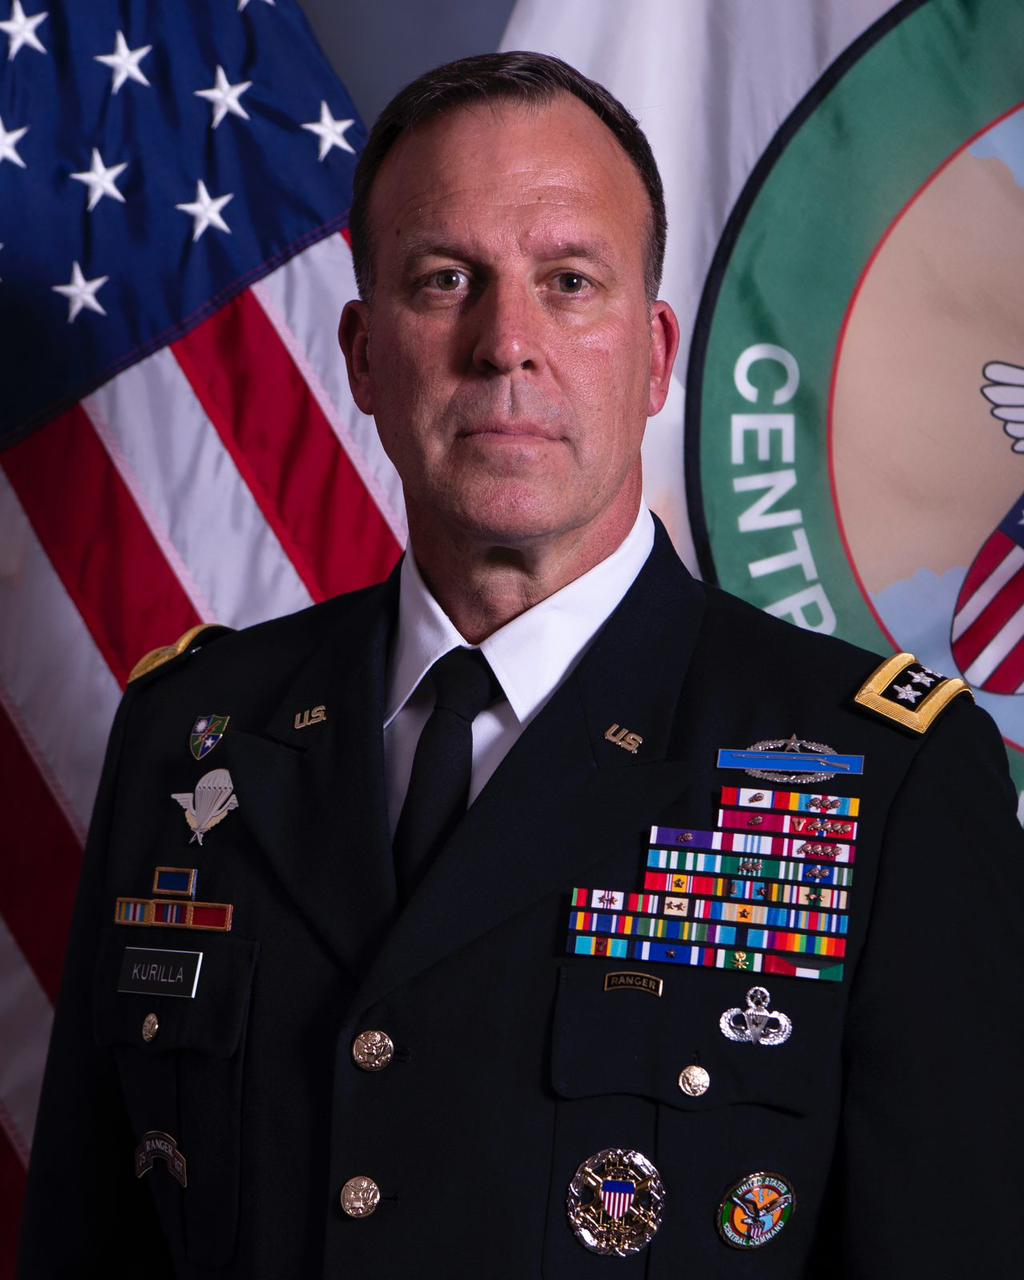 Pakistan’s counter-terrorism operations critical to region’s stability: CENTCOM chief